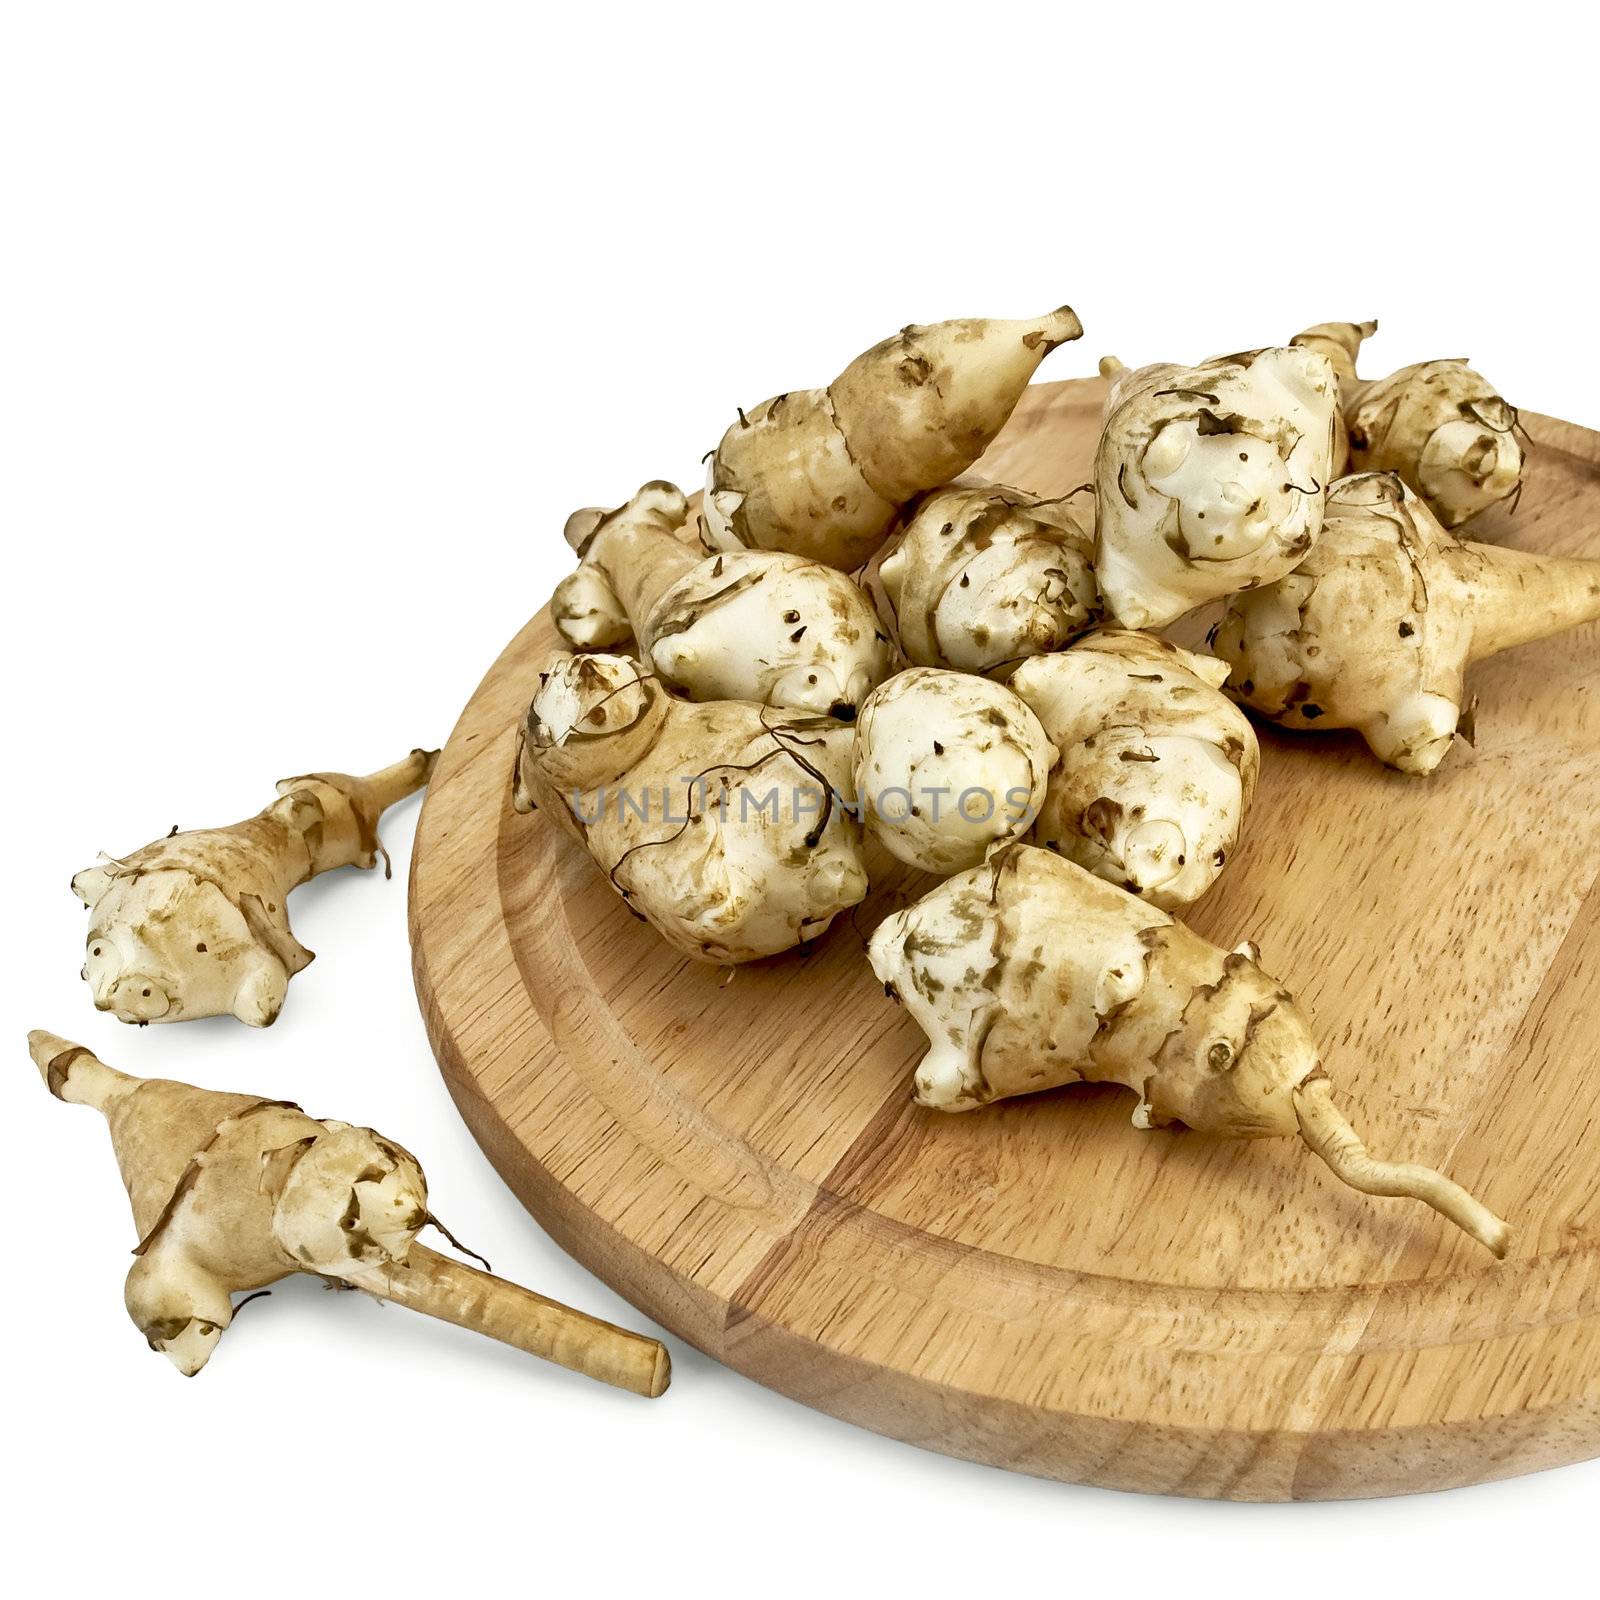 Jerusalem artichoke in a circular wooden board, two tuber on the desk isolated on white background